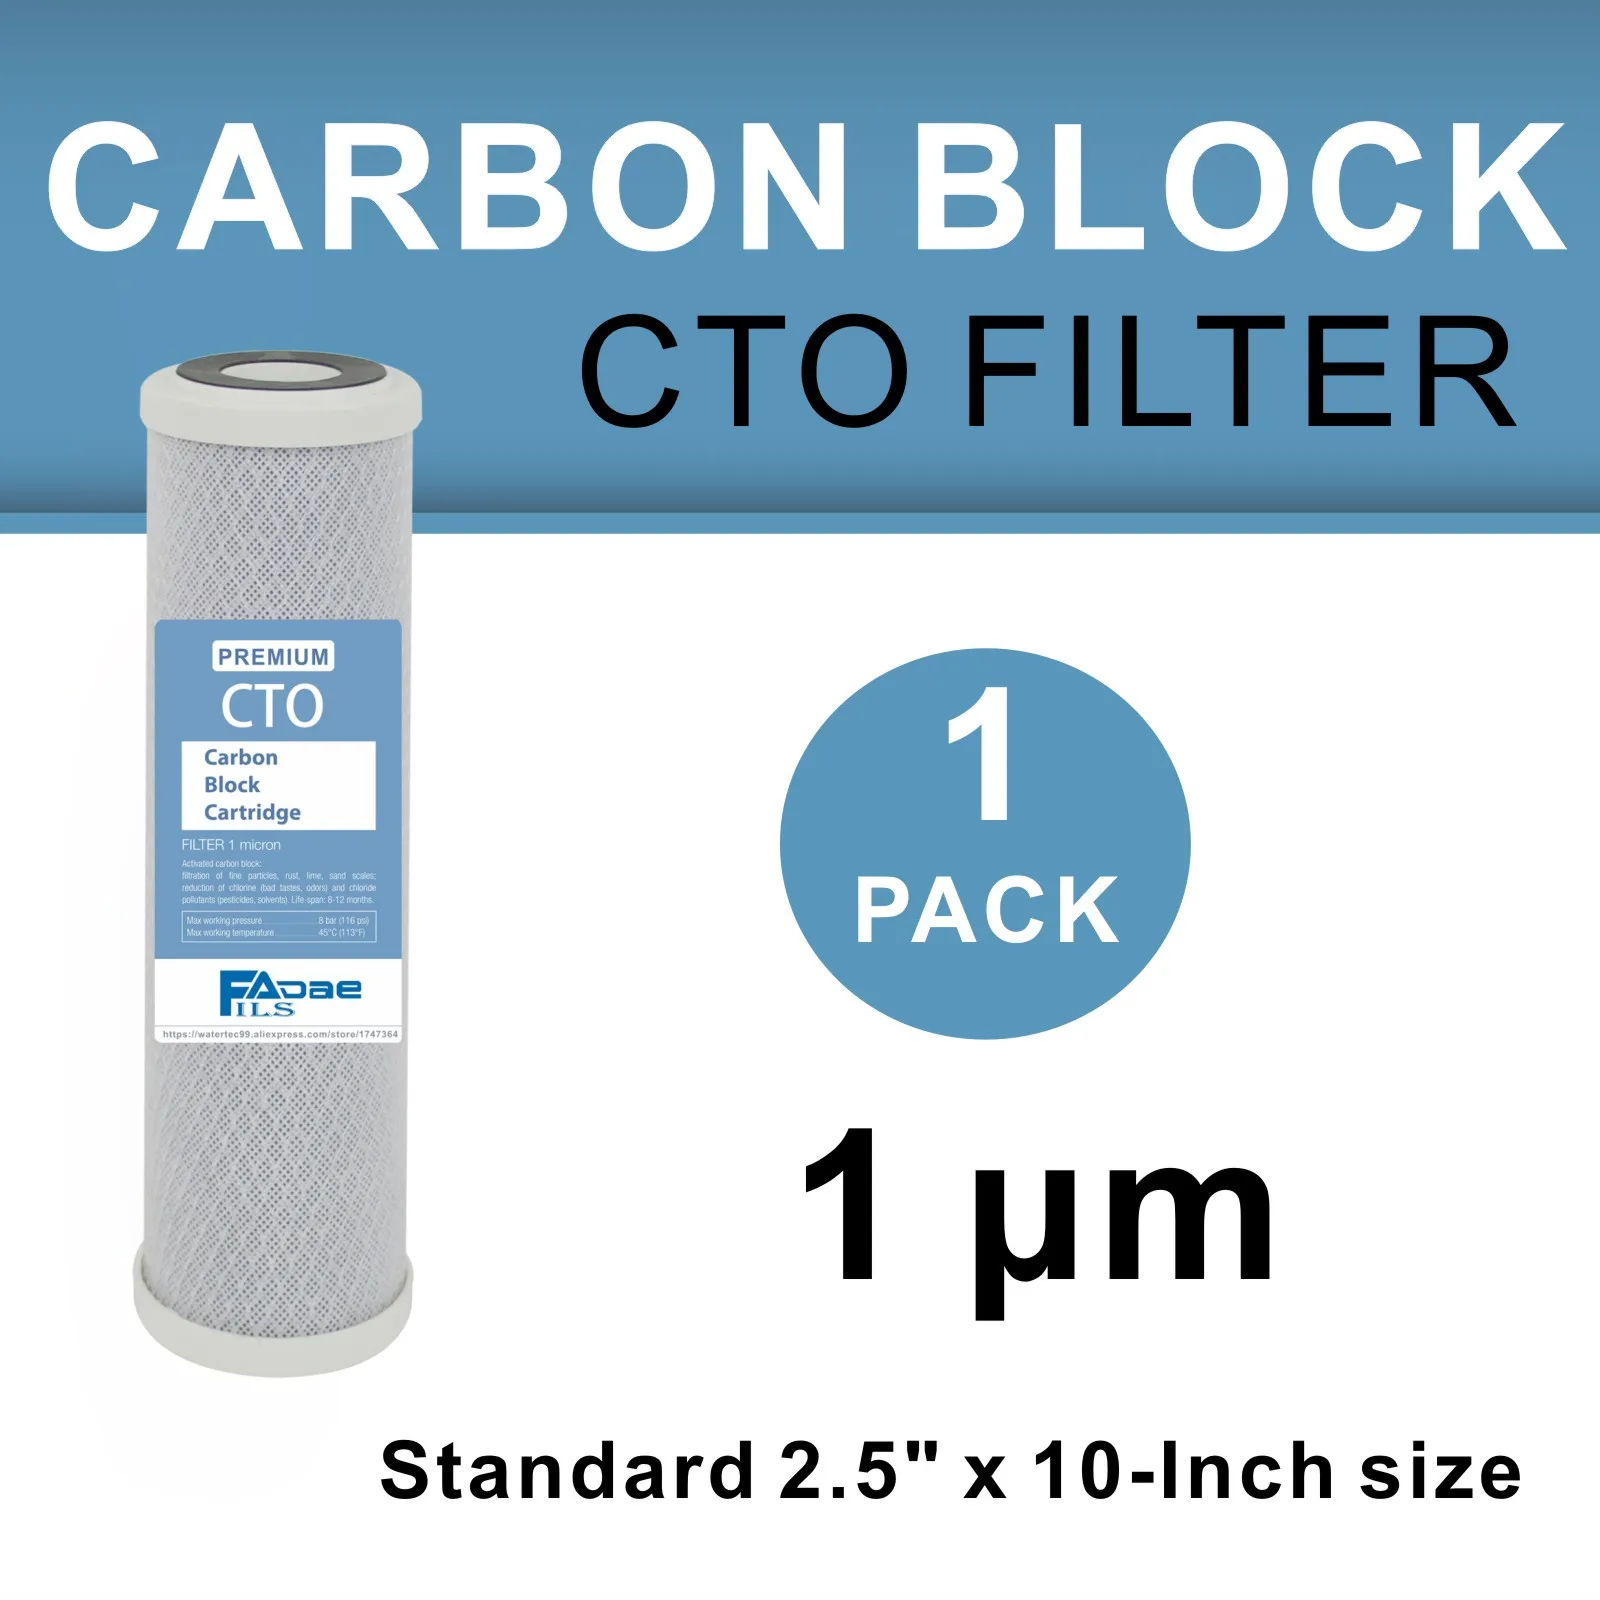 NewShun Universal 1 Micron 2.5 x 10 Whole House Carbon Block Water Filter Cartridge NSF 42 Certified Activated Carbon Replacement CTO Water Purifier Filter - 3 Pack